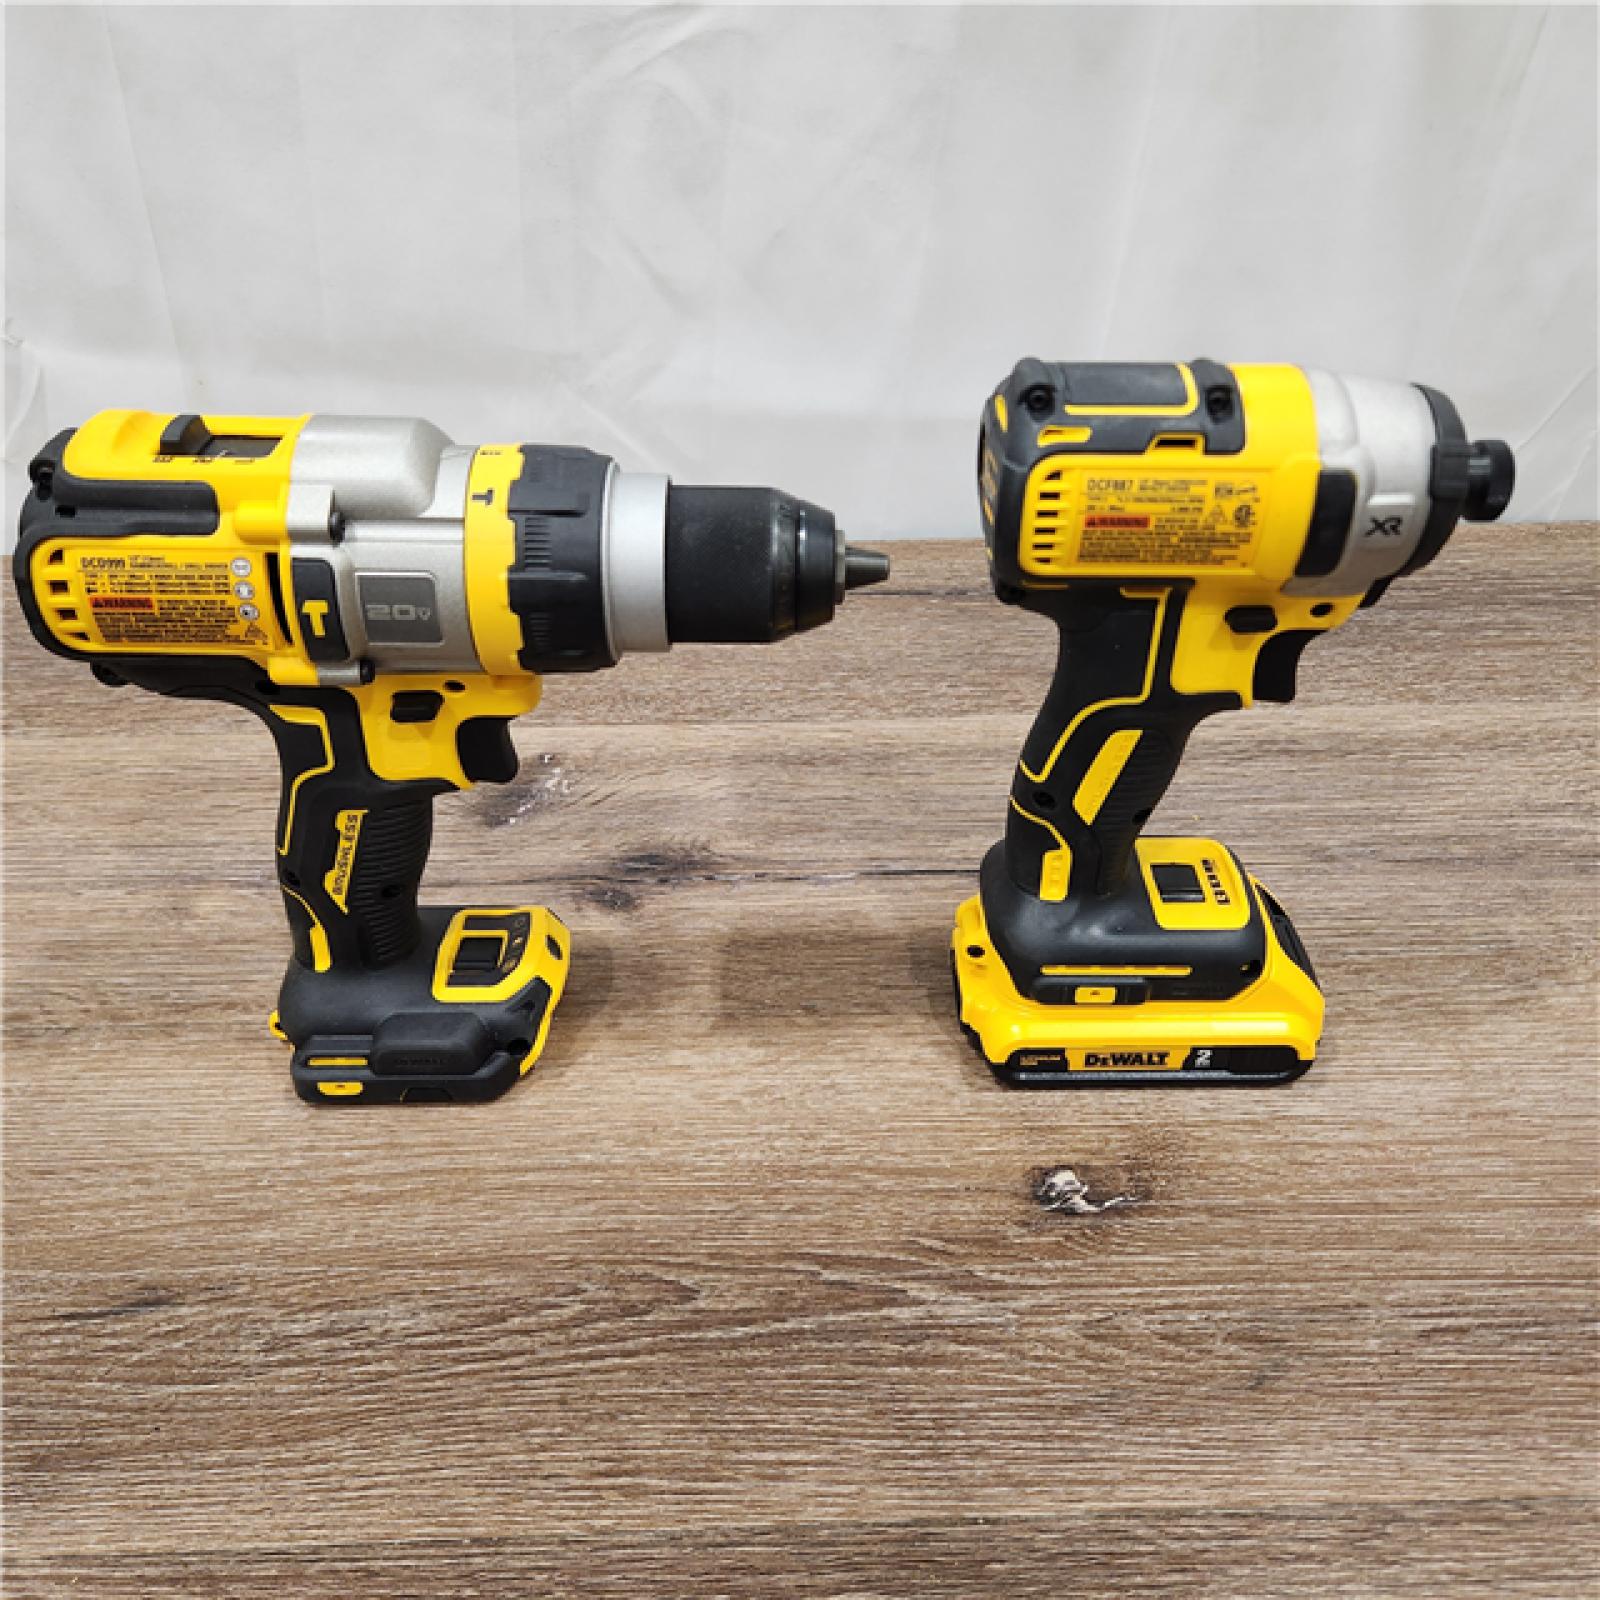 AS-IS DEWALT DCK2100D1T1 20V MAX FLEXVOLT ADVANTAGE Lithium Ion Brushless Cordless 2-Tool Combo Kit W/ Hammer Drill and (Not included Impact Driver 2.0 Ah)